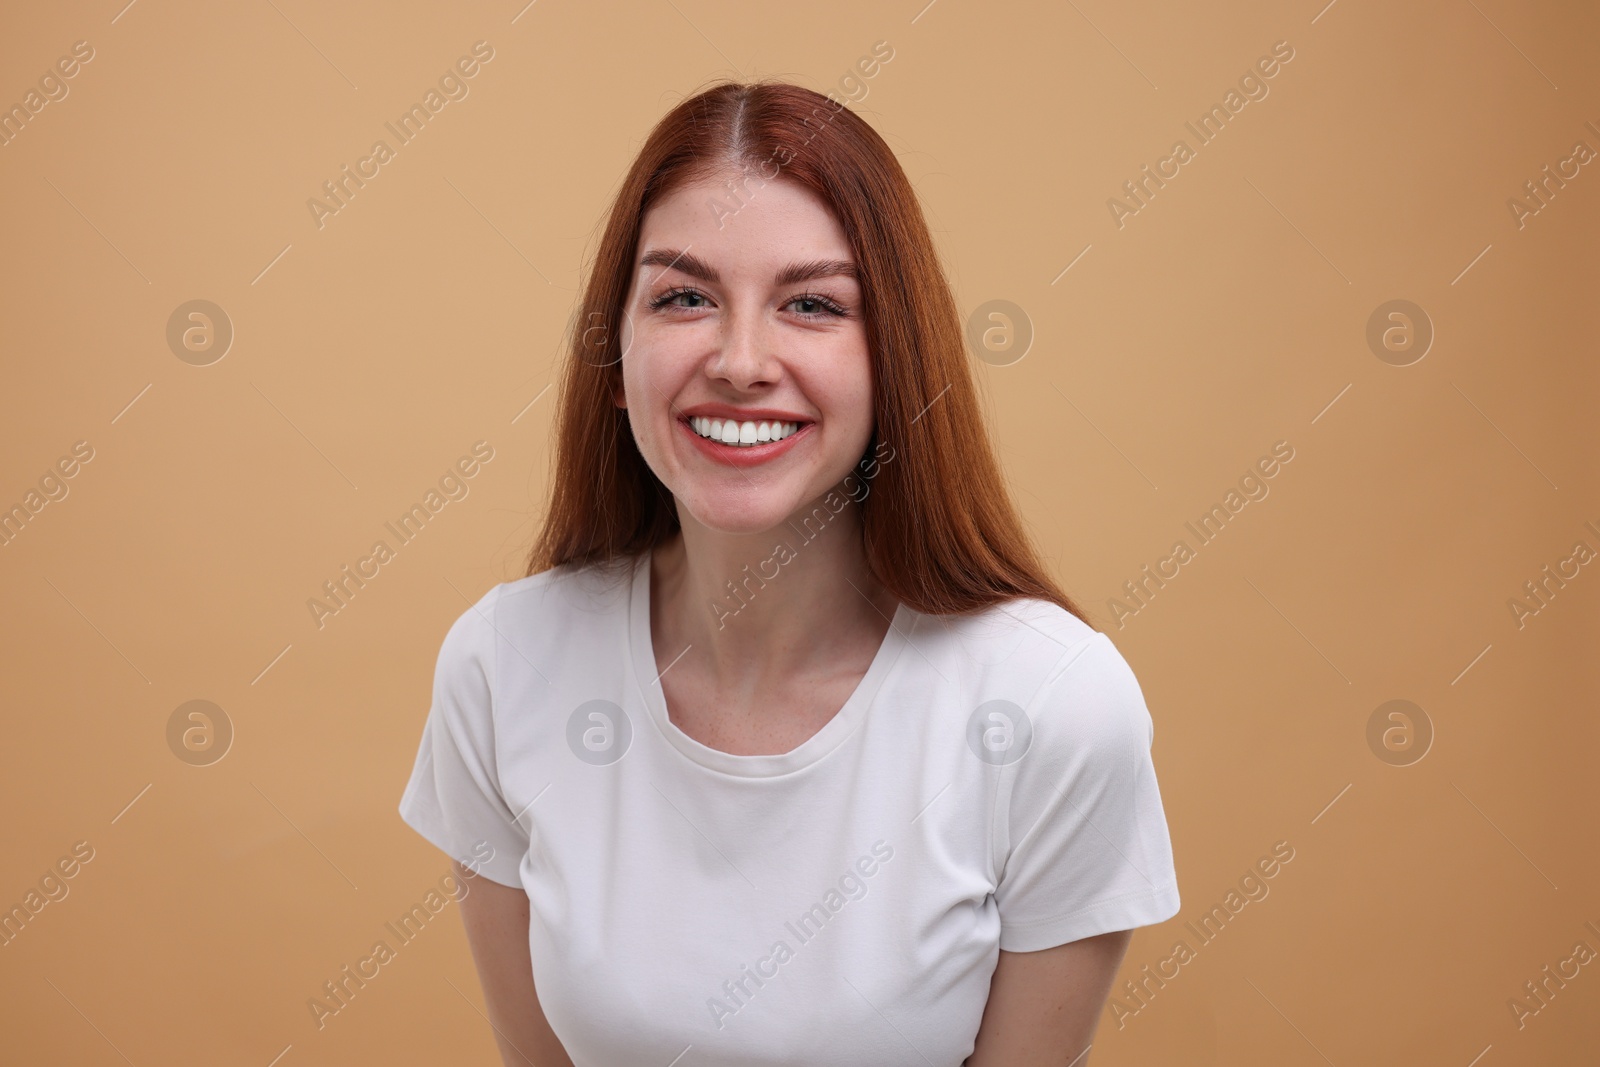 Photo of Portrait of smiling woman on beige background